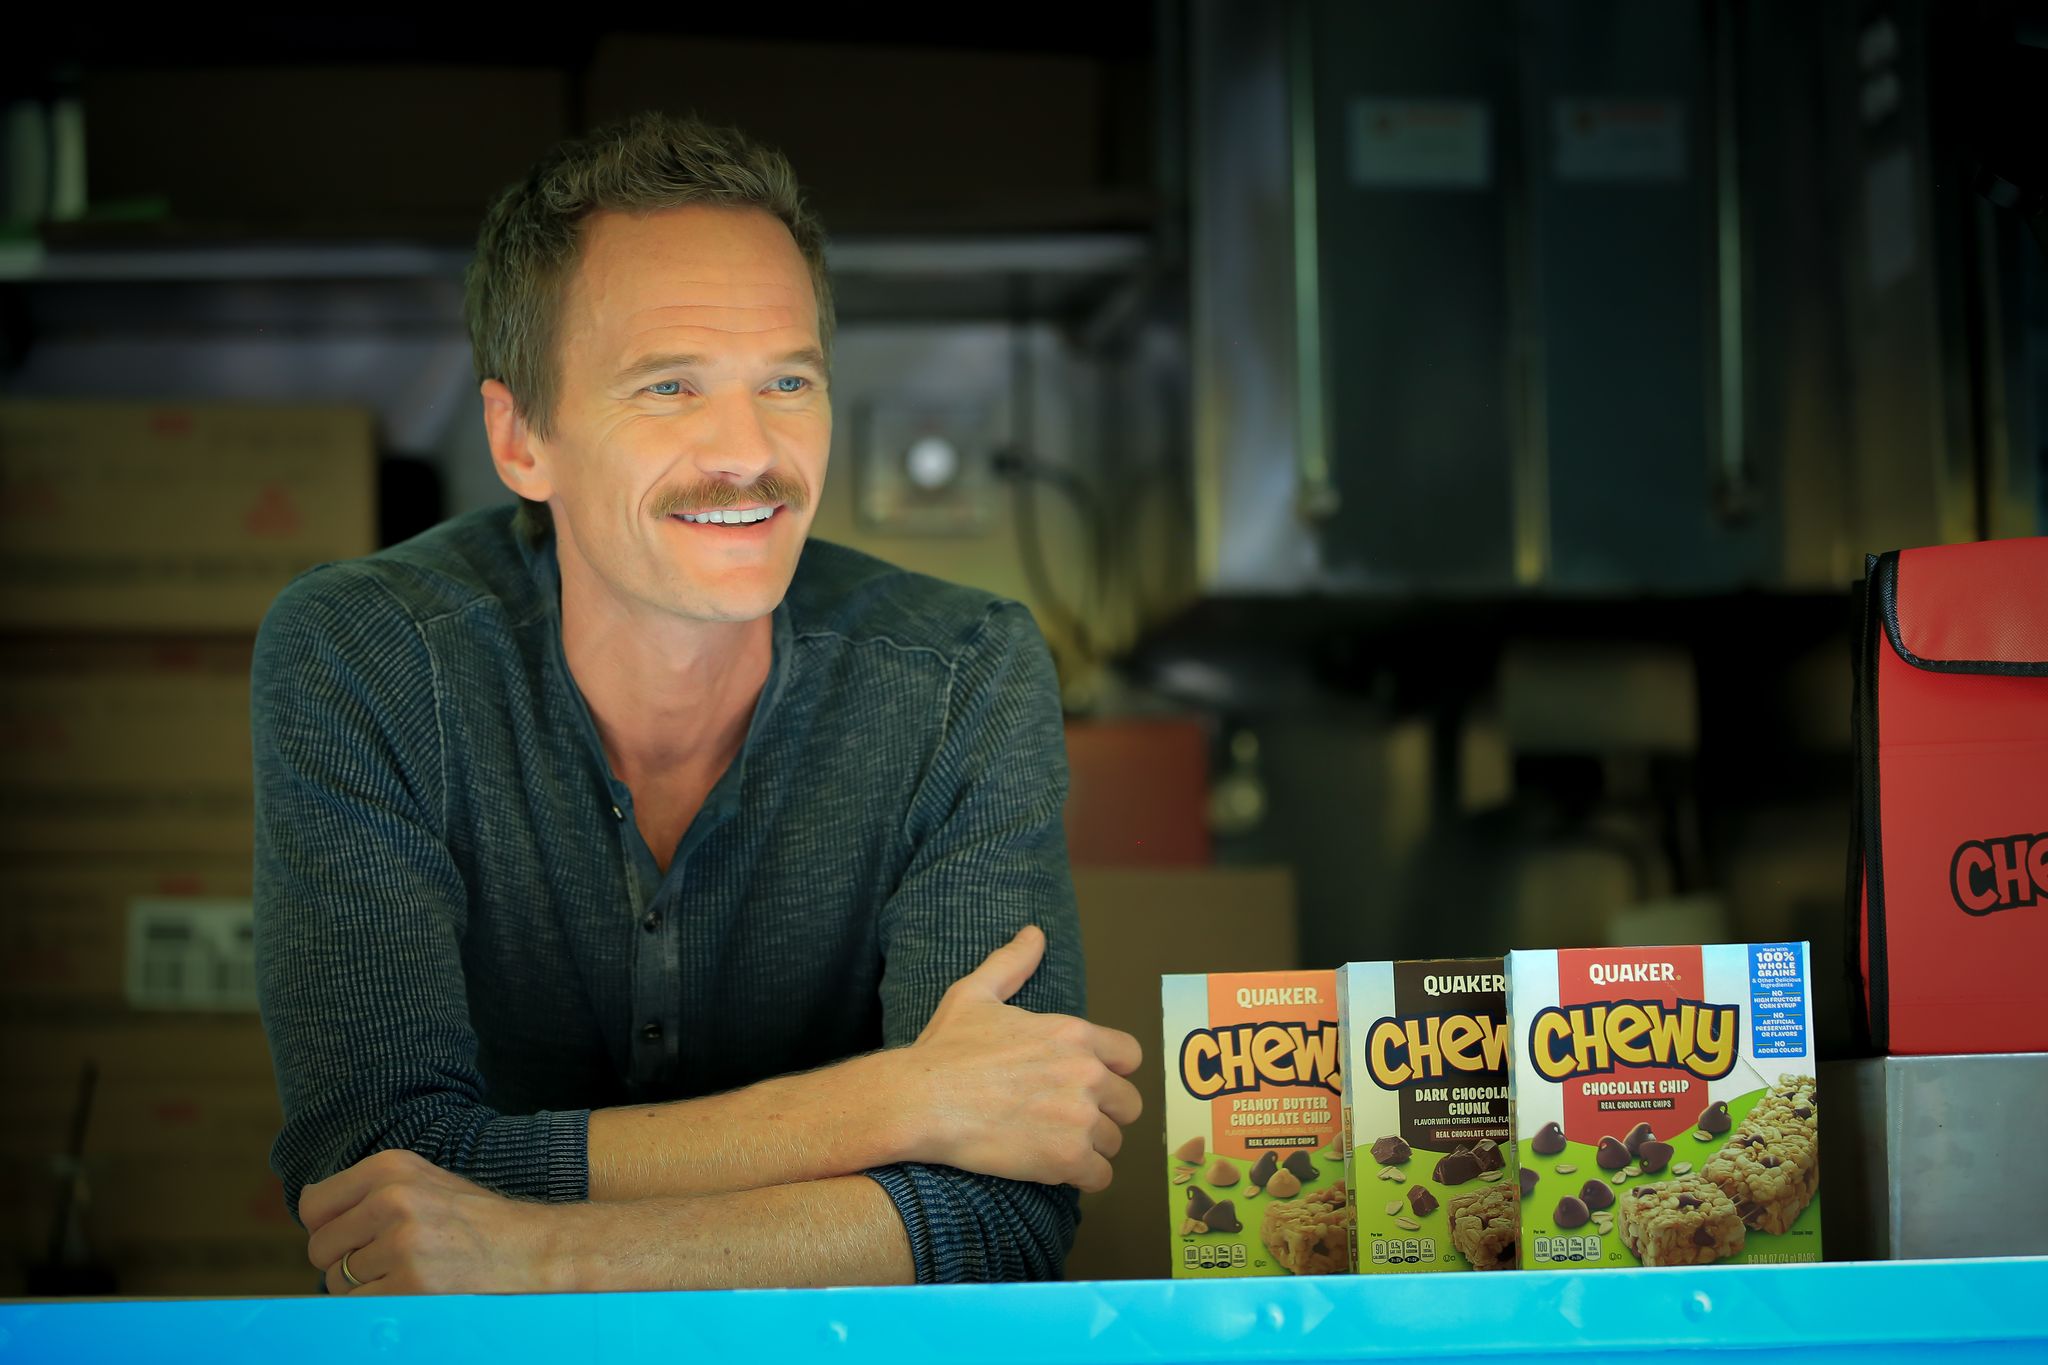 Neil Patrick Harris visits Chewy food truck NYC for adoptaclassroom promotion